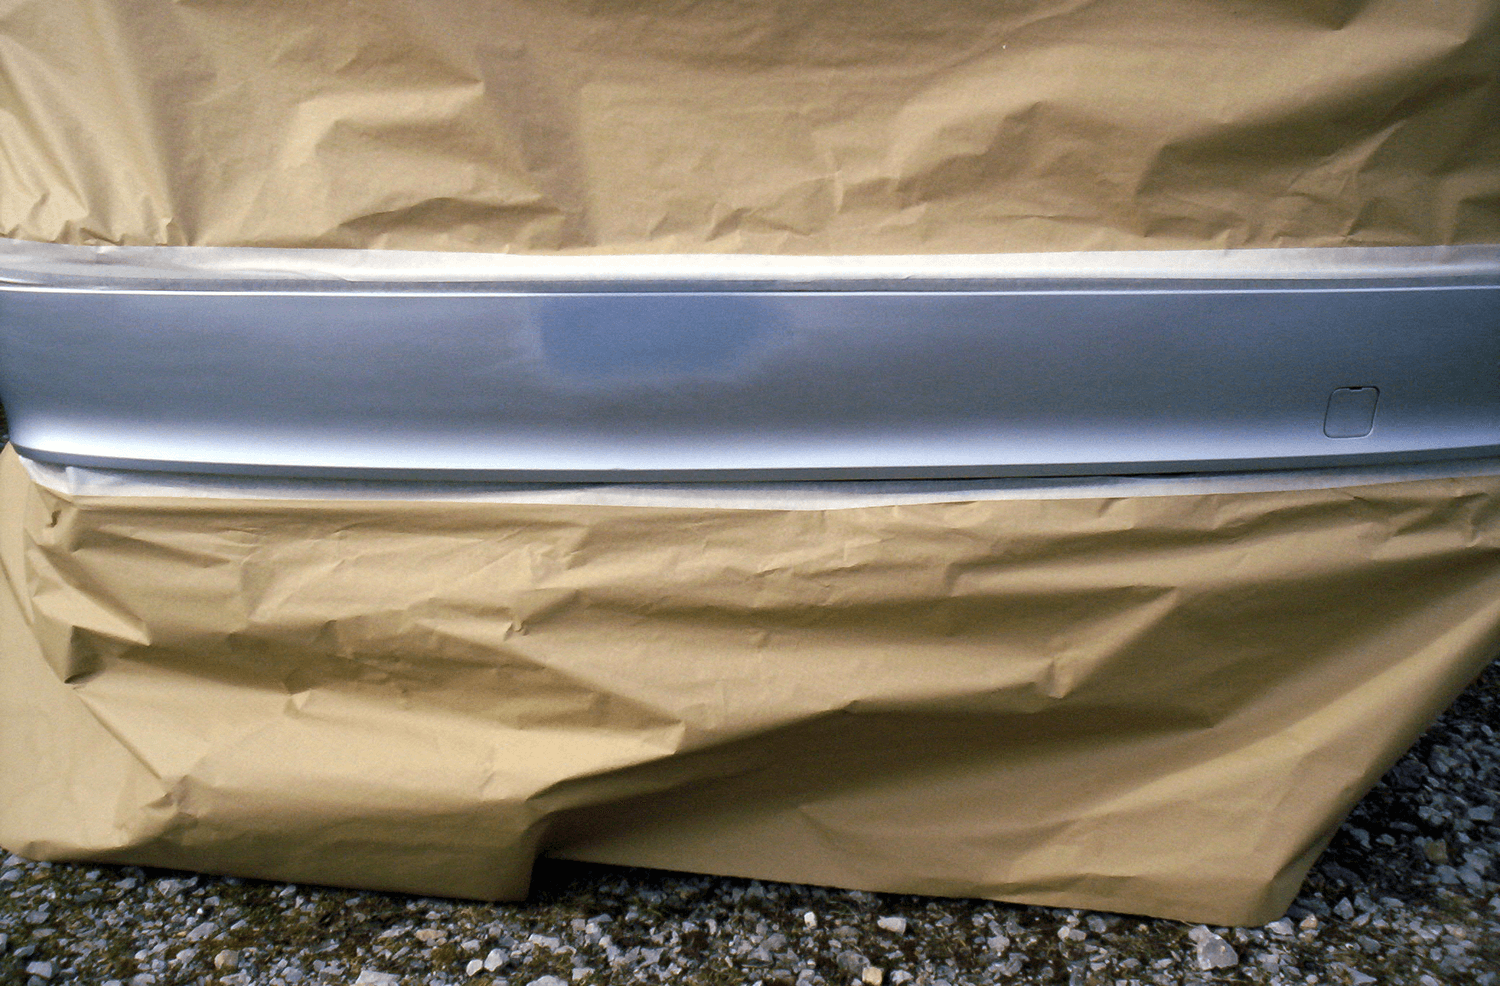 Blemished bumper treated